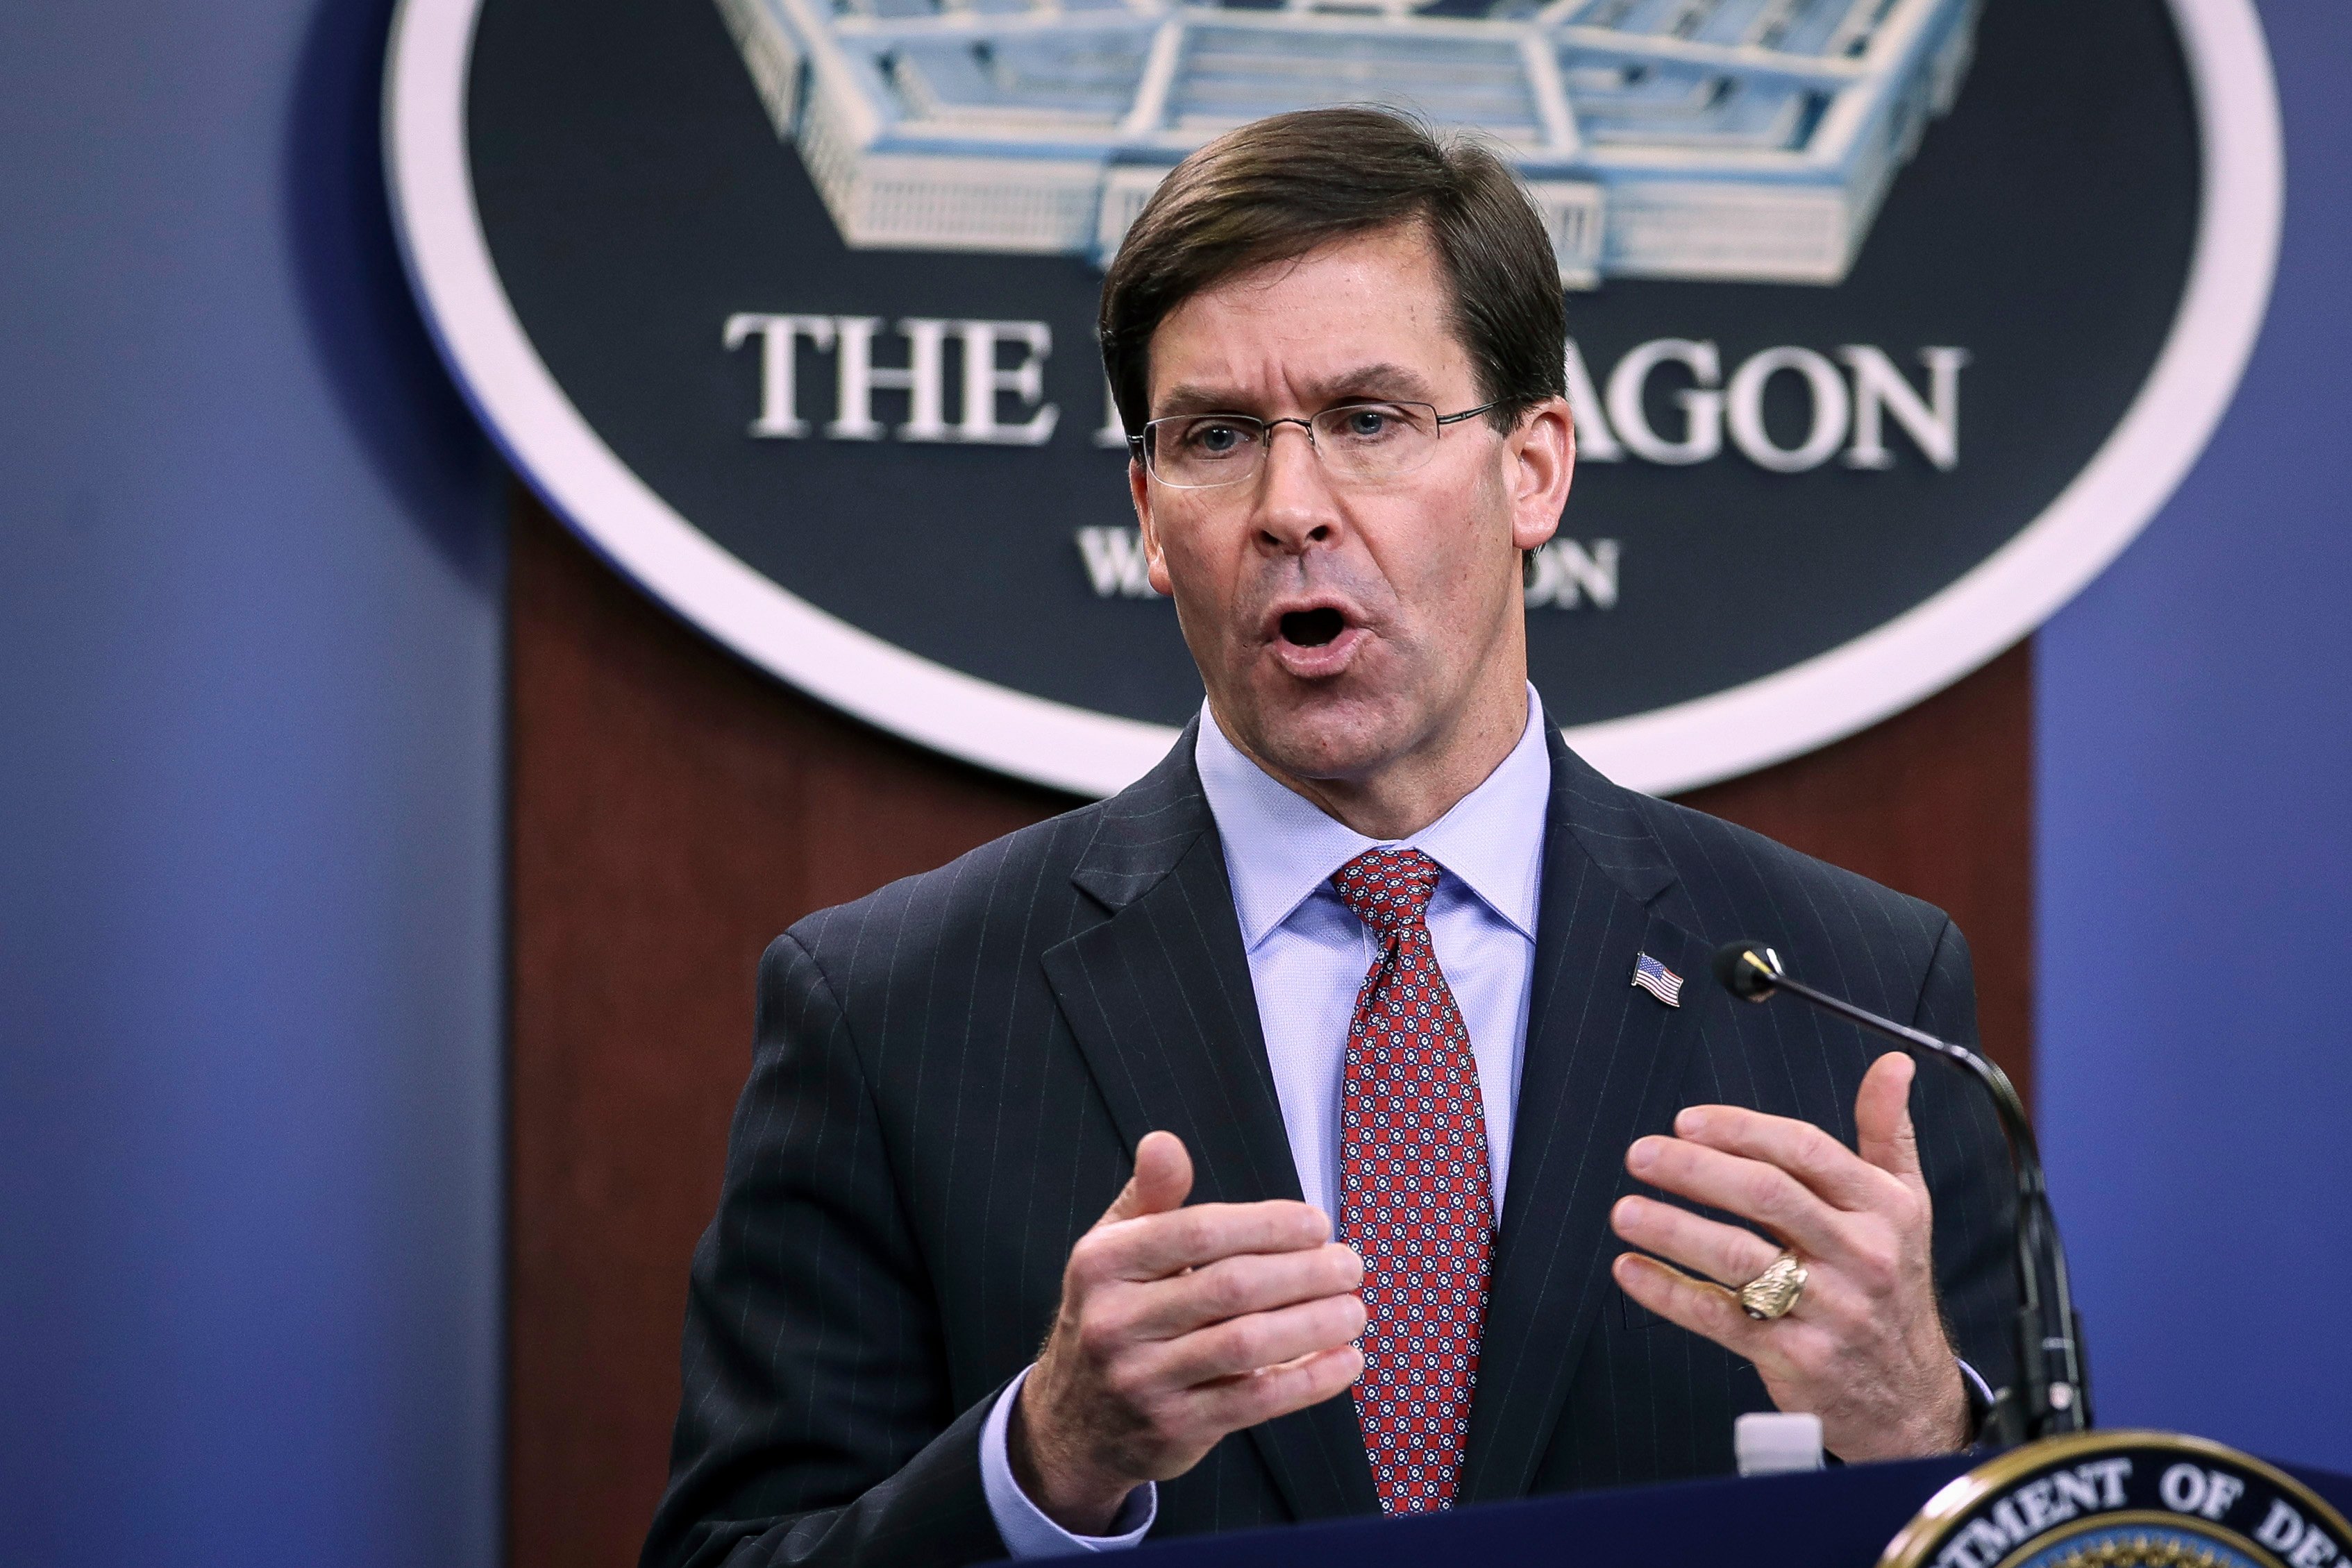 ARLINGTON, VA DECEMBER 20: Secretary of Defense Mark Esper holds an end of year press conference at the Pentagon on December 20, 2019 in Arlington, Virginia. Esper and Milley fielded questions on a wide range of topics, including the situation in North Korea and a recent Washington Post referred to as the "Afghanistan Papers." (Photo by Drew Angerer/Getty Images)